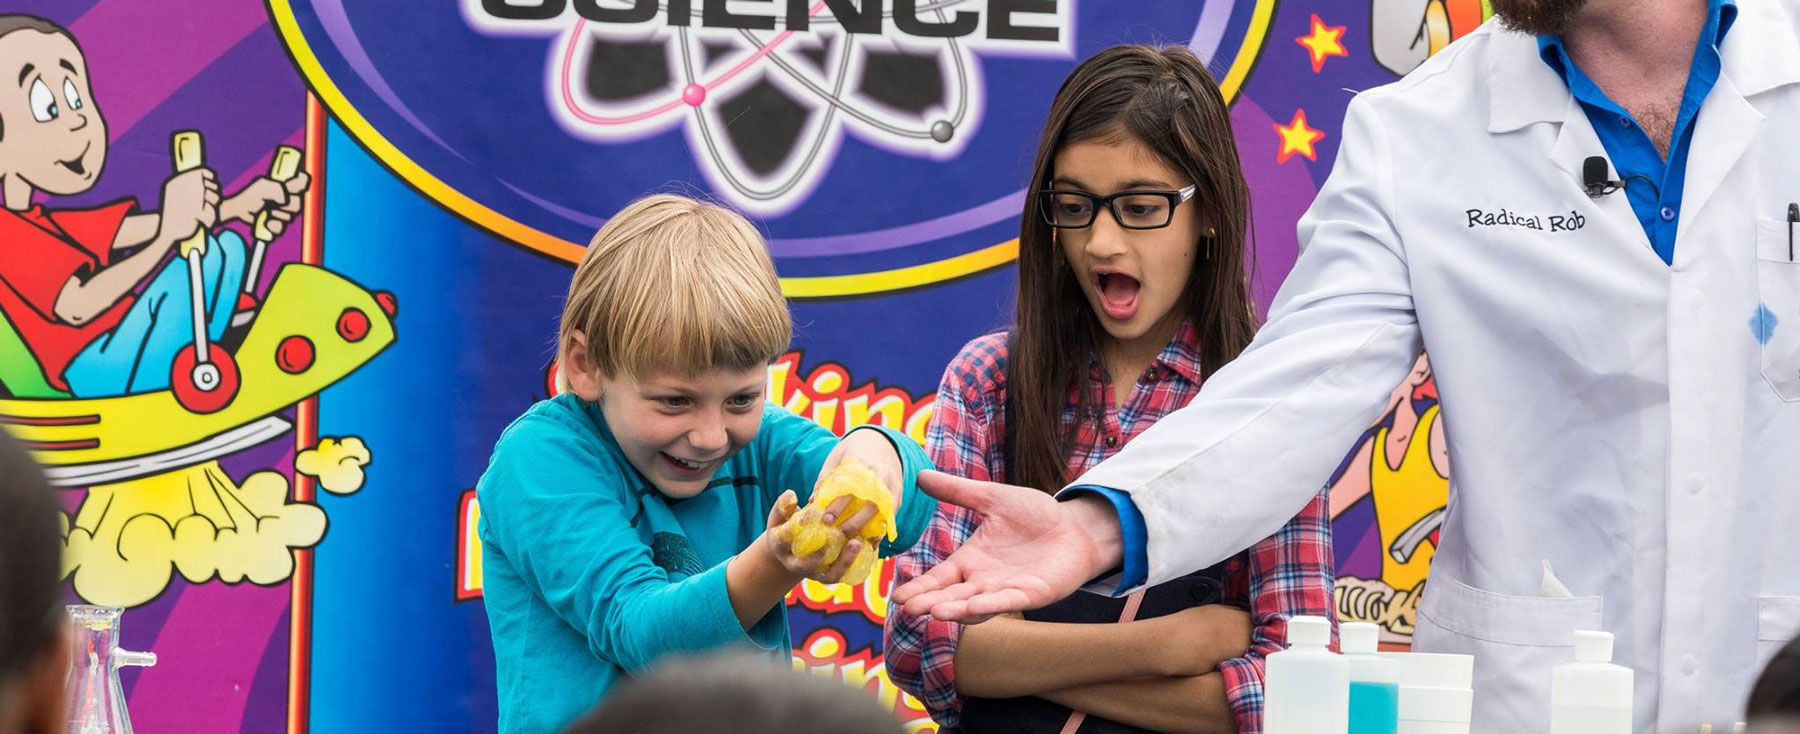 San Diego Festival of Science & Engineering Expo Day